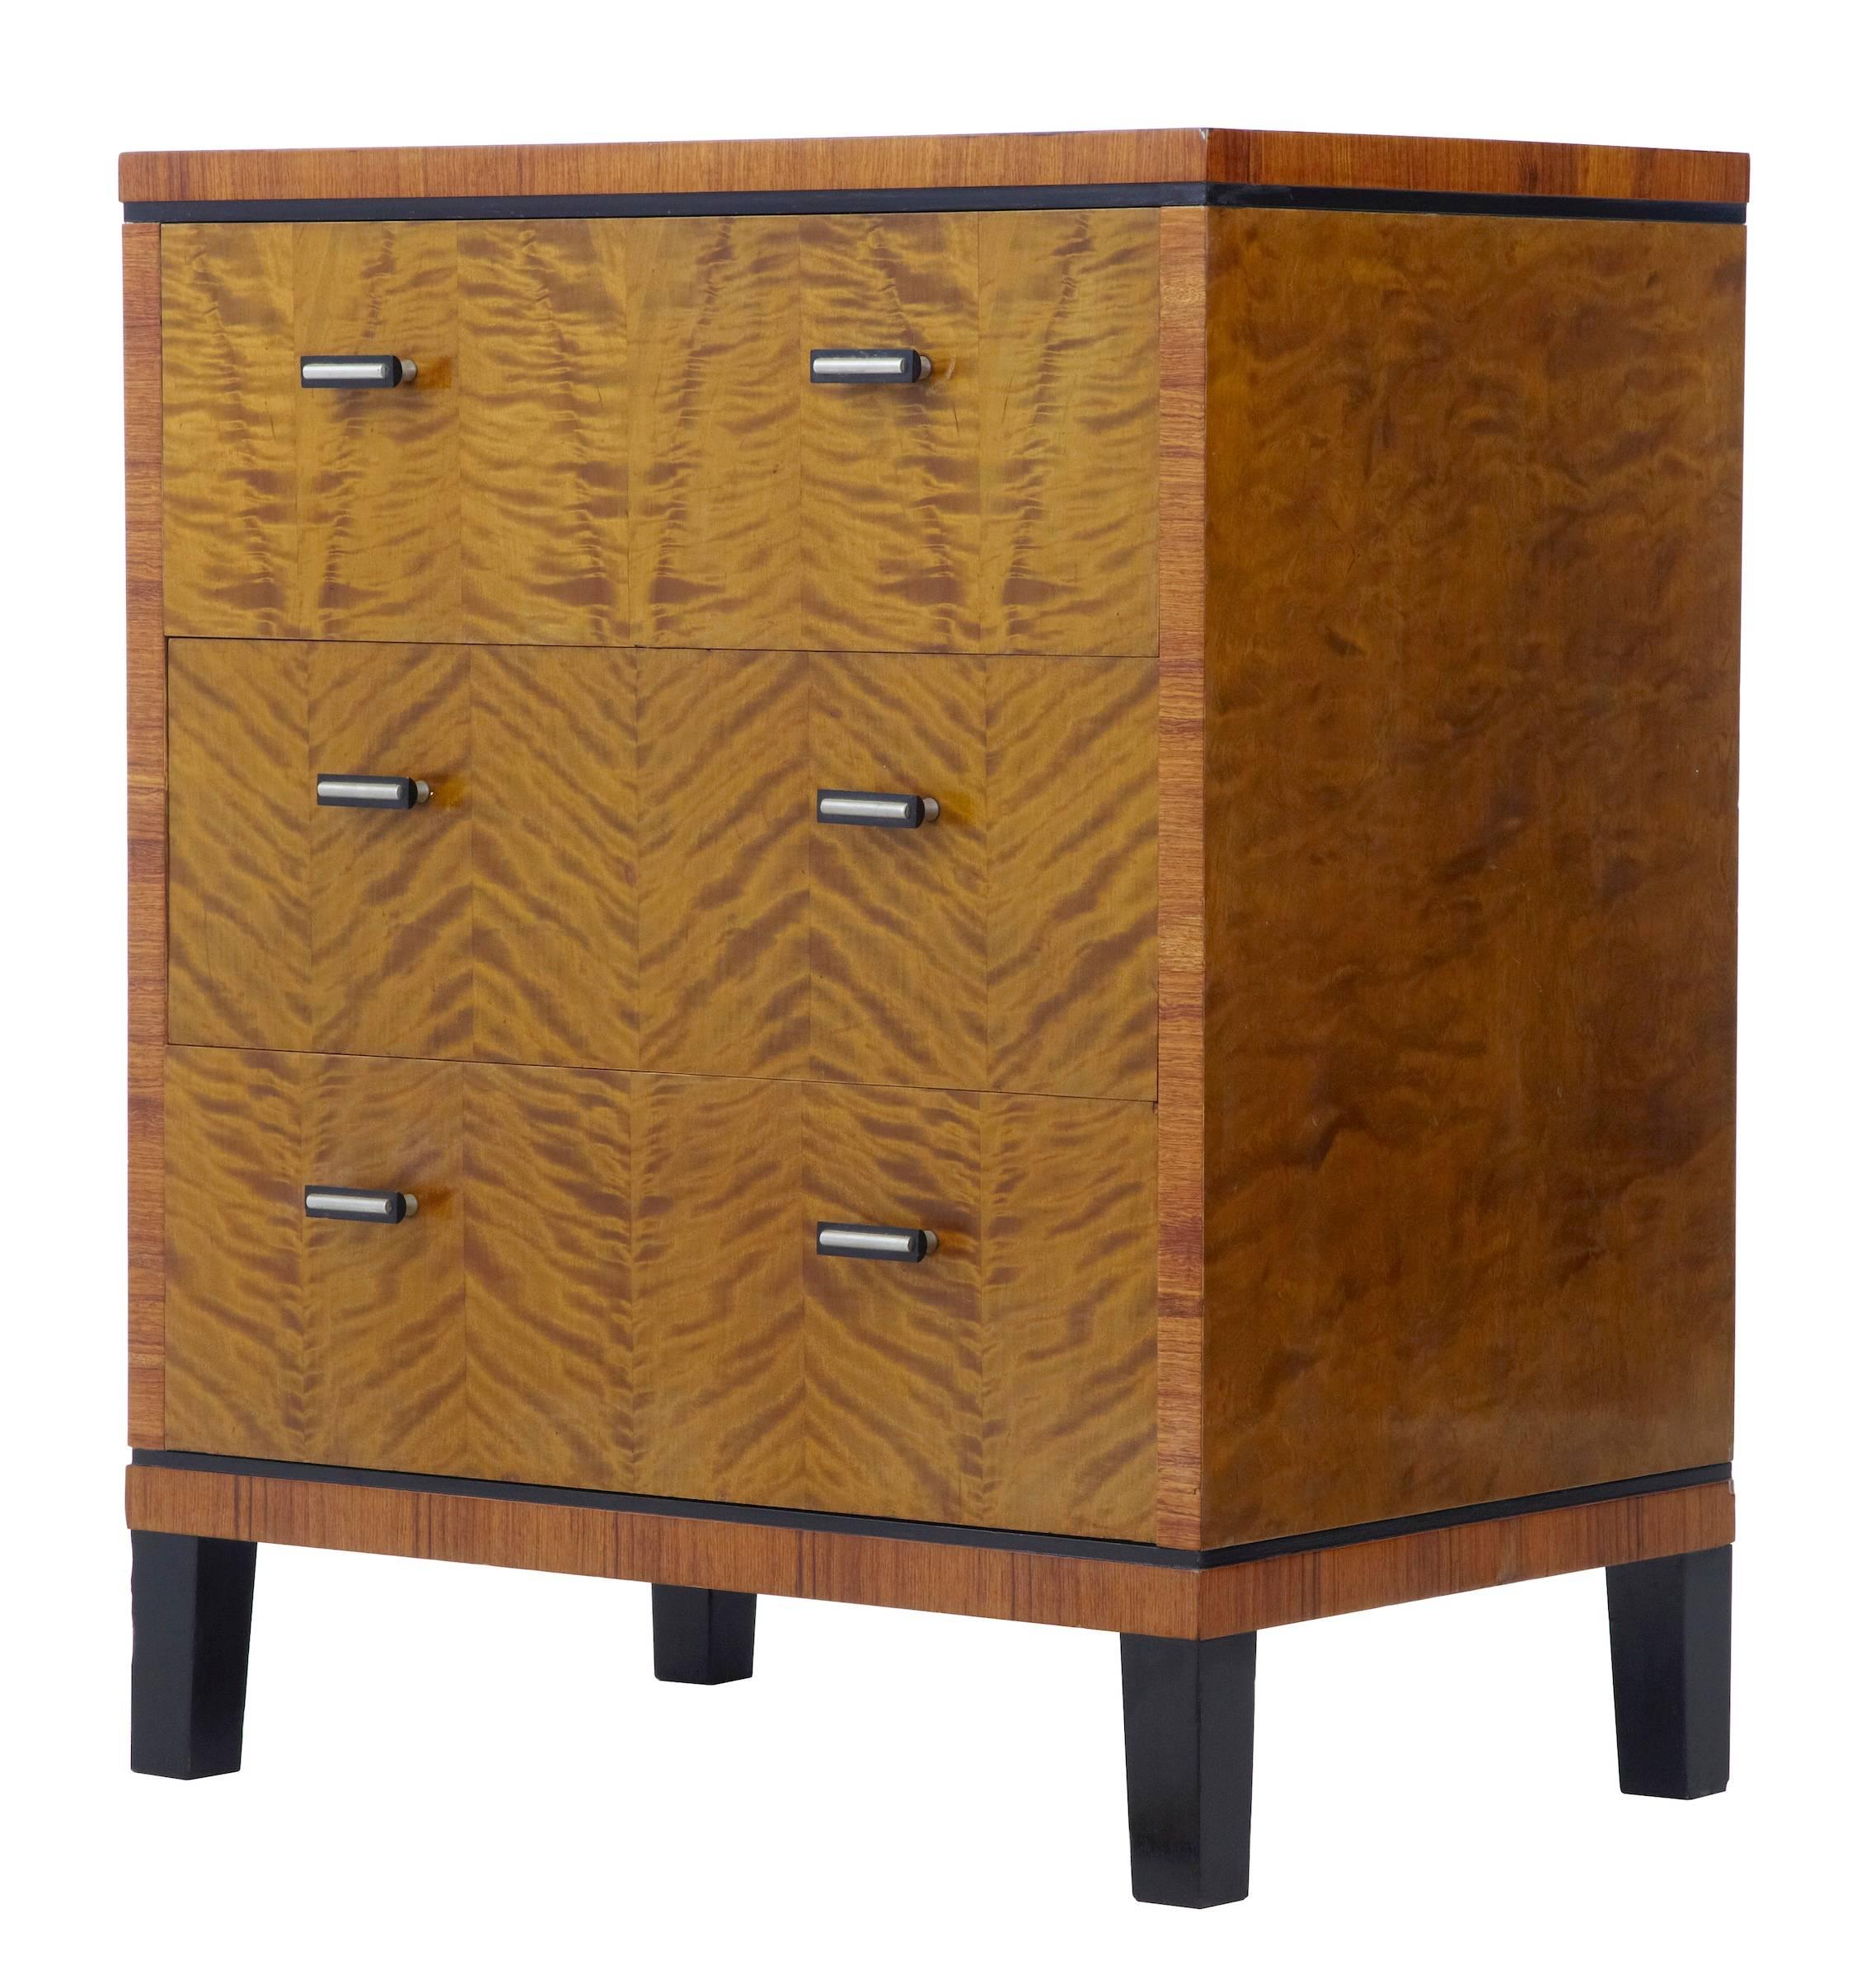 Three-drawer commode, circa 1950.
Rich birch color with ebonized banding and feet.
Minor veneer repairs.

Measures: Height: 31 1/2